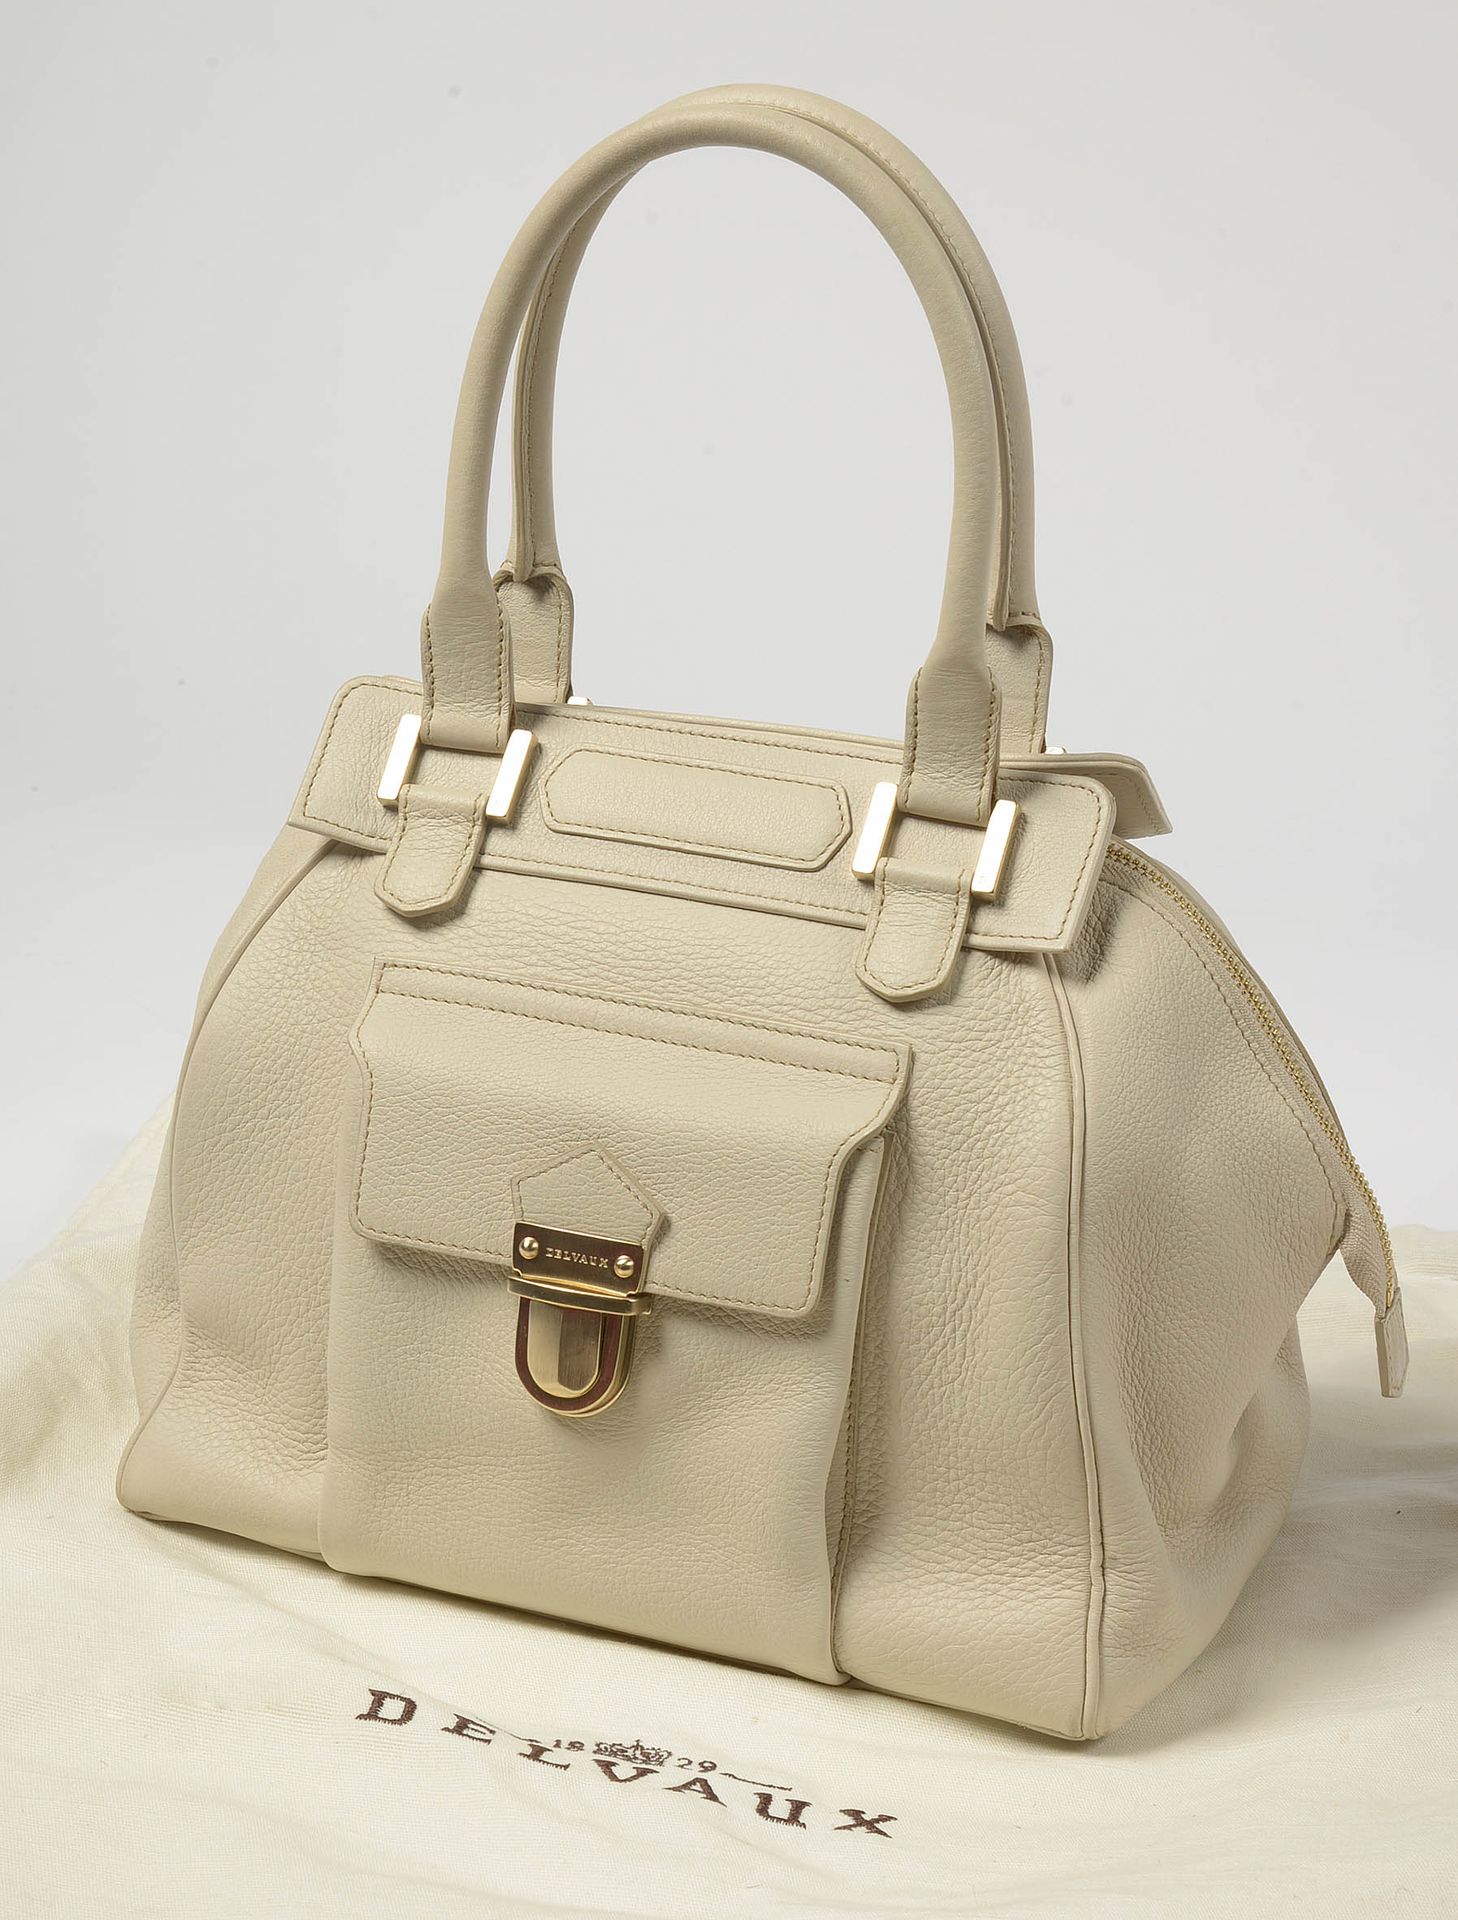 DELVAUX Delvaux bag in cream leather. In good condition. The dustbag is attached&hellip;